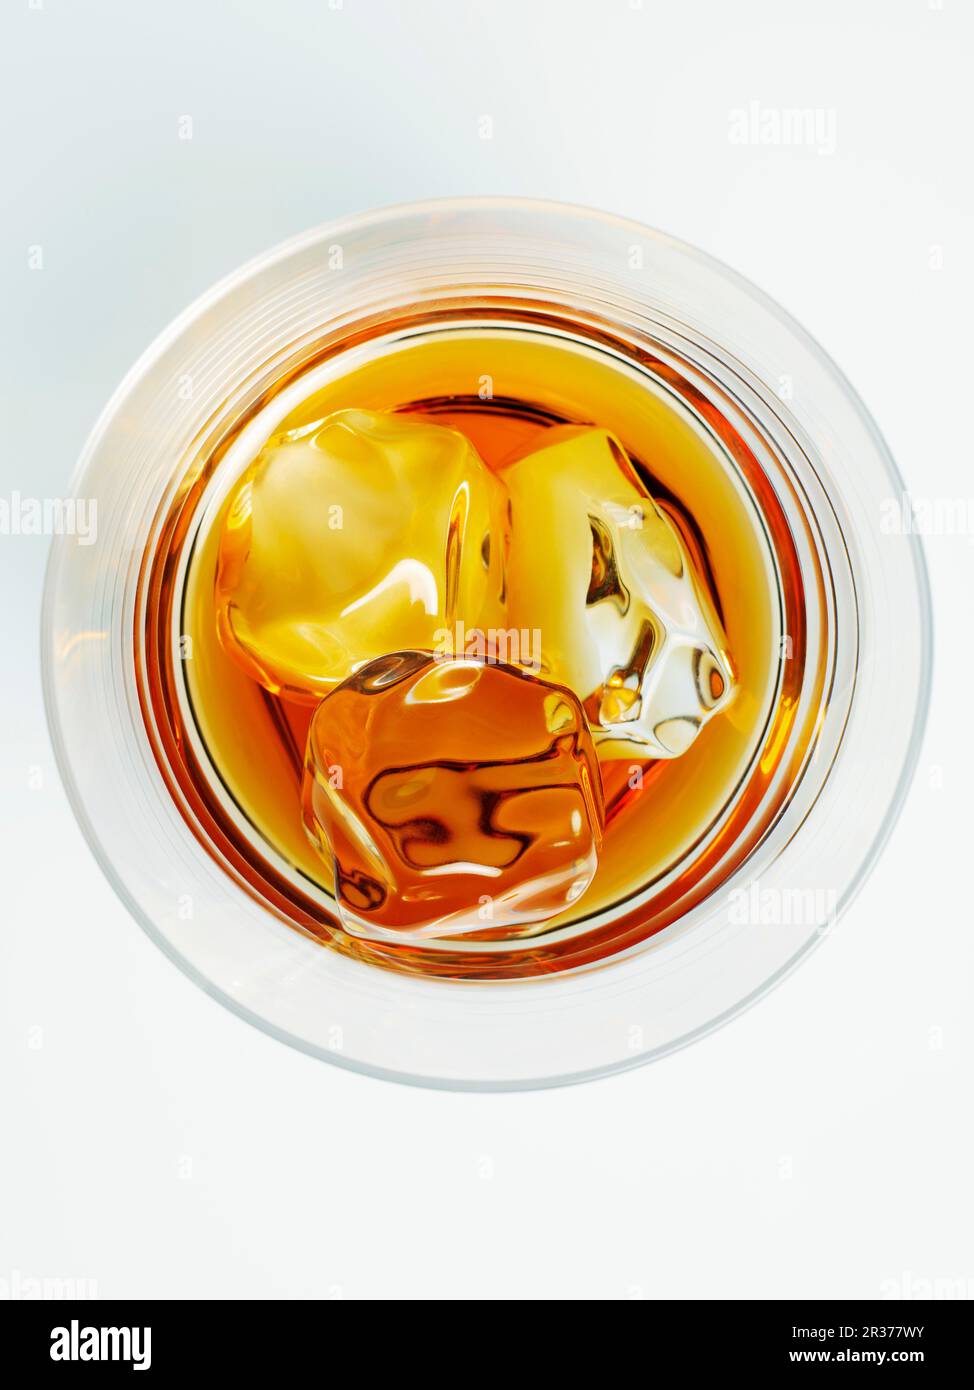 https://c8.alamy.com/comp/2R377WY/a-glass-of-whisky-with-ice-cubes-top-view-2R377WY.jpg